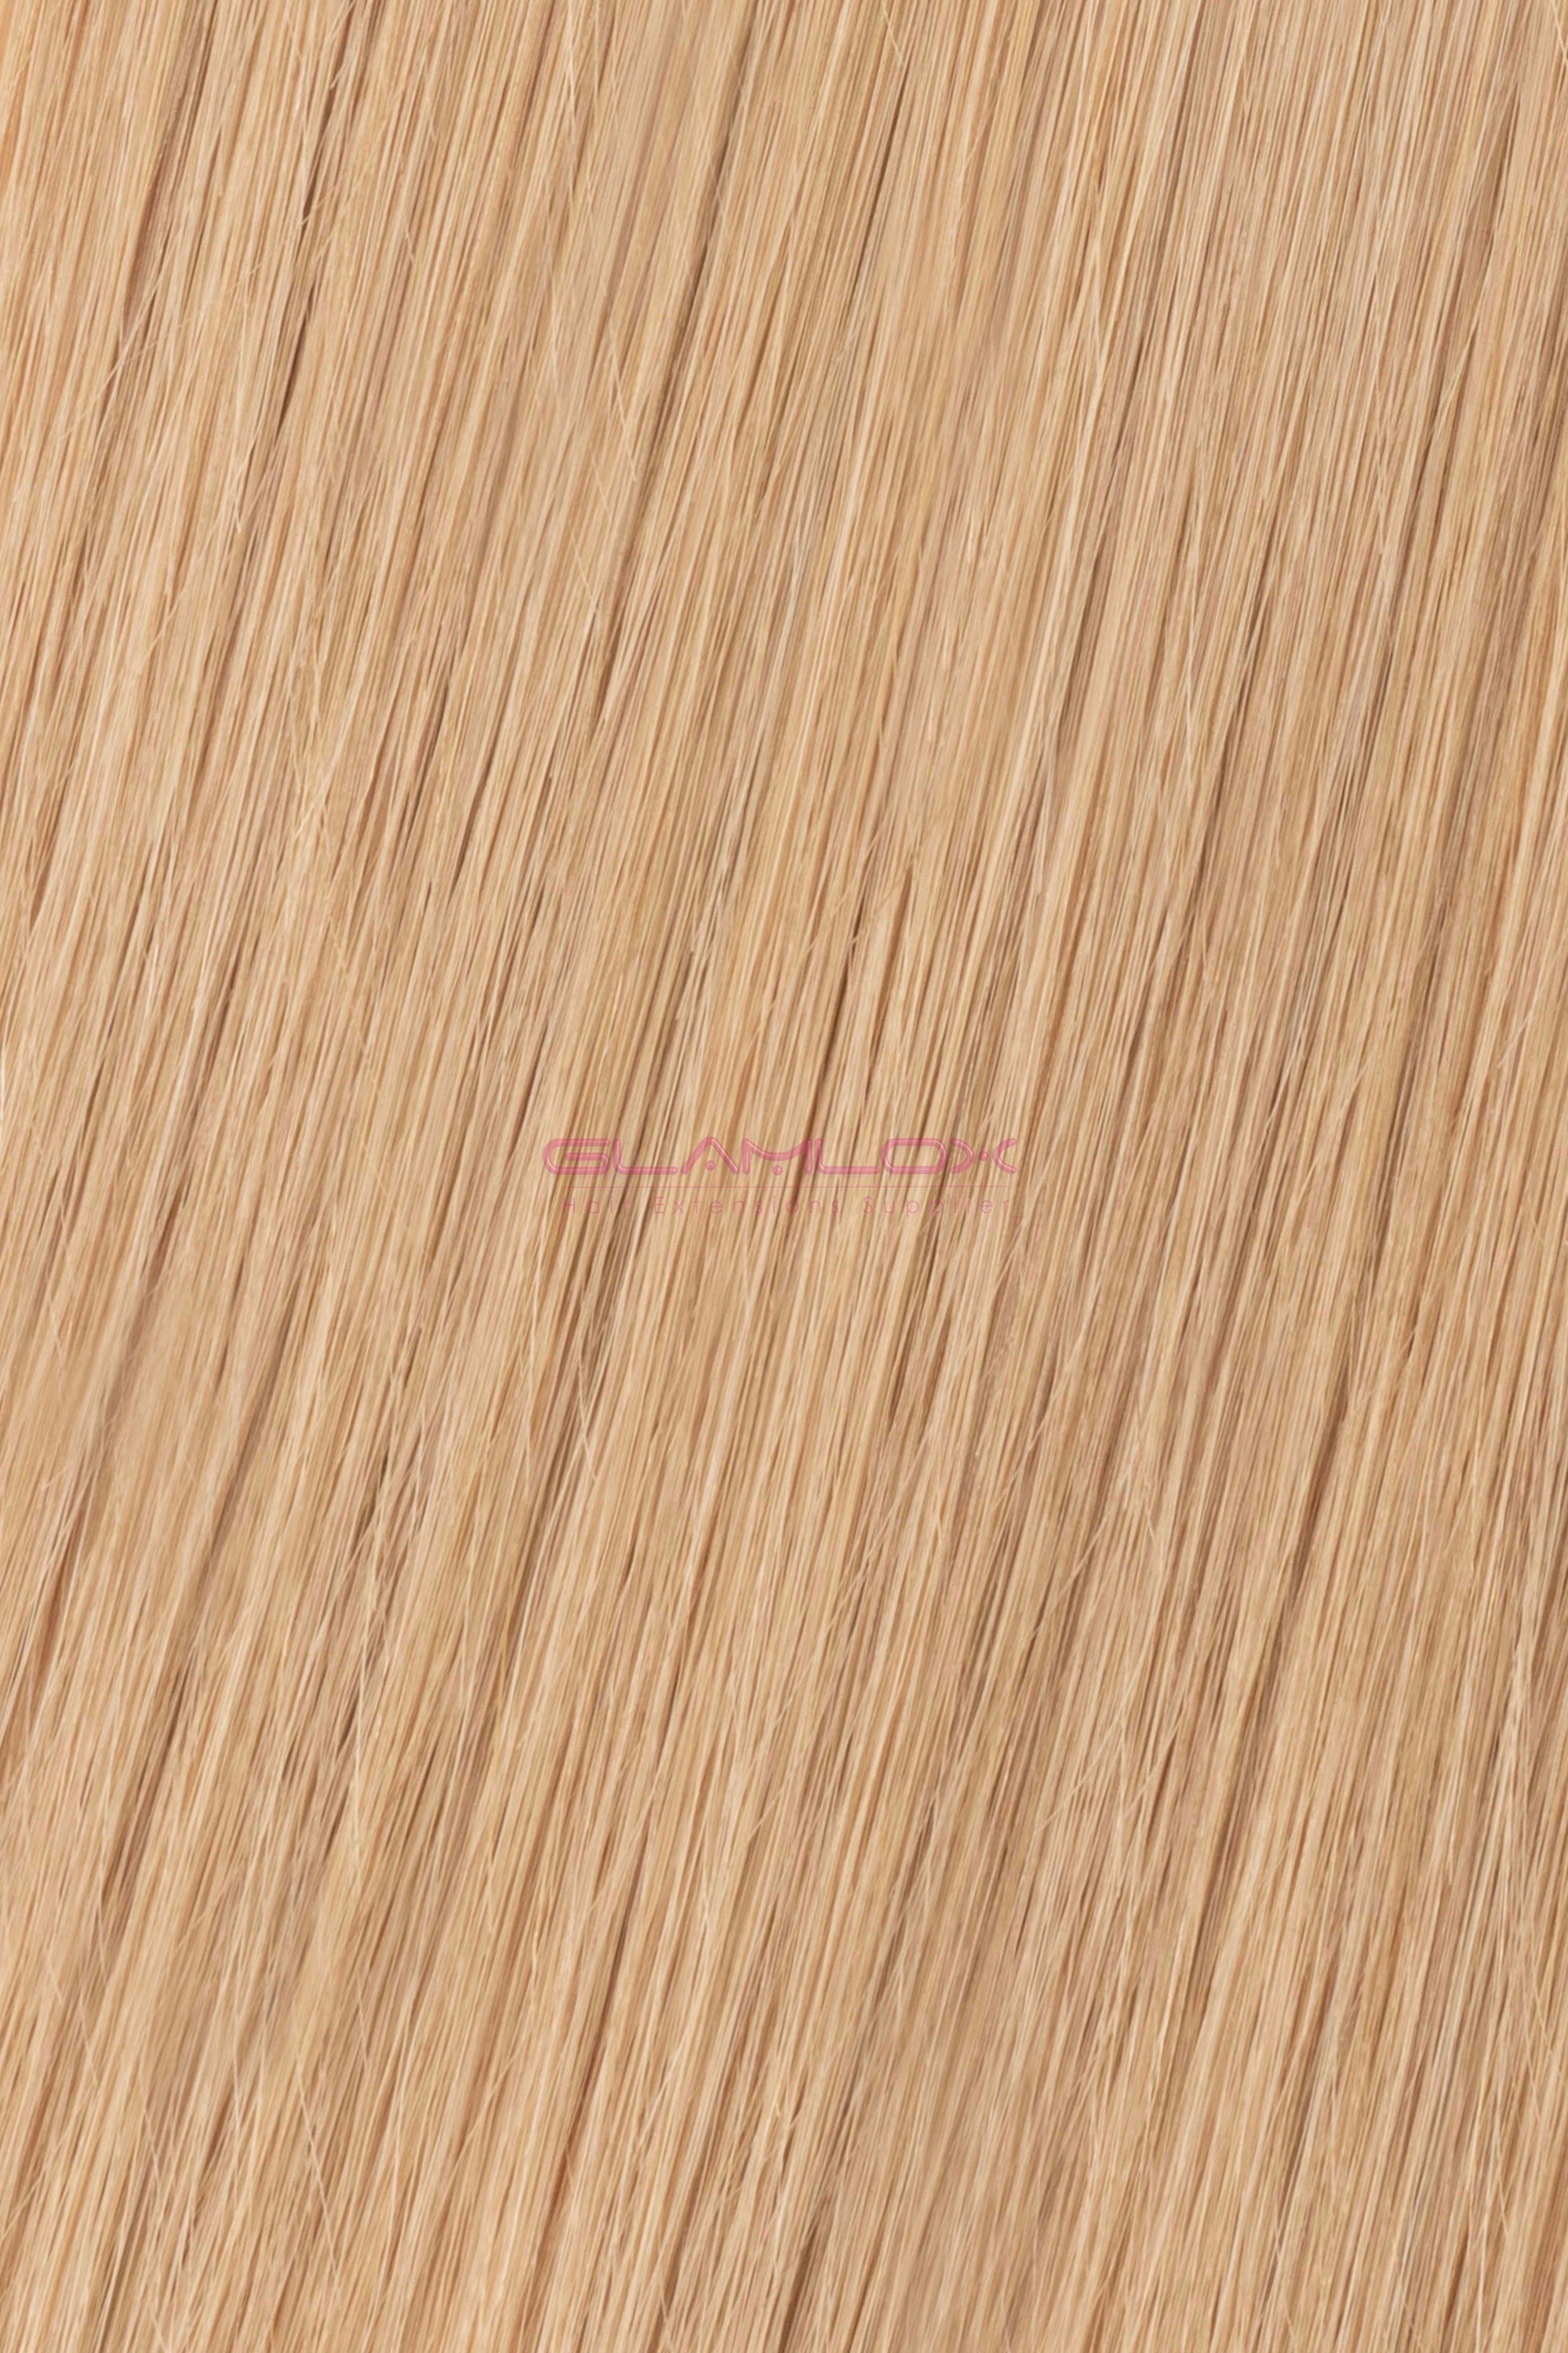 18" - 19" Half Weft Hair Extensions - Russian Mongolian Natural Ratio Remy Human Hair